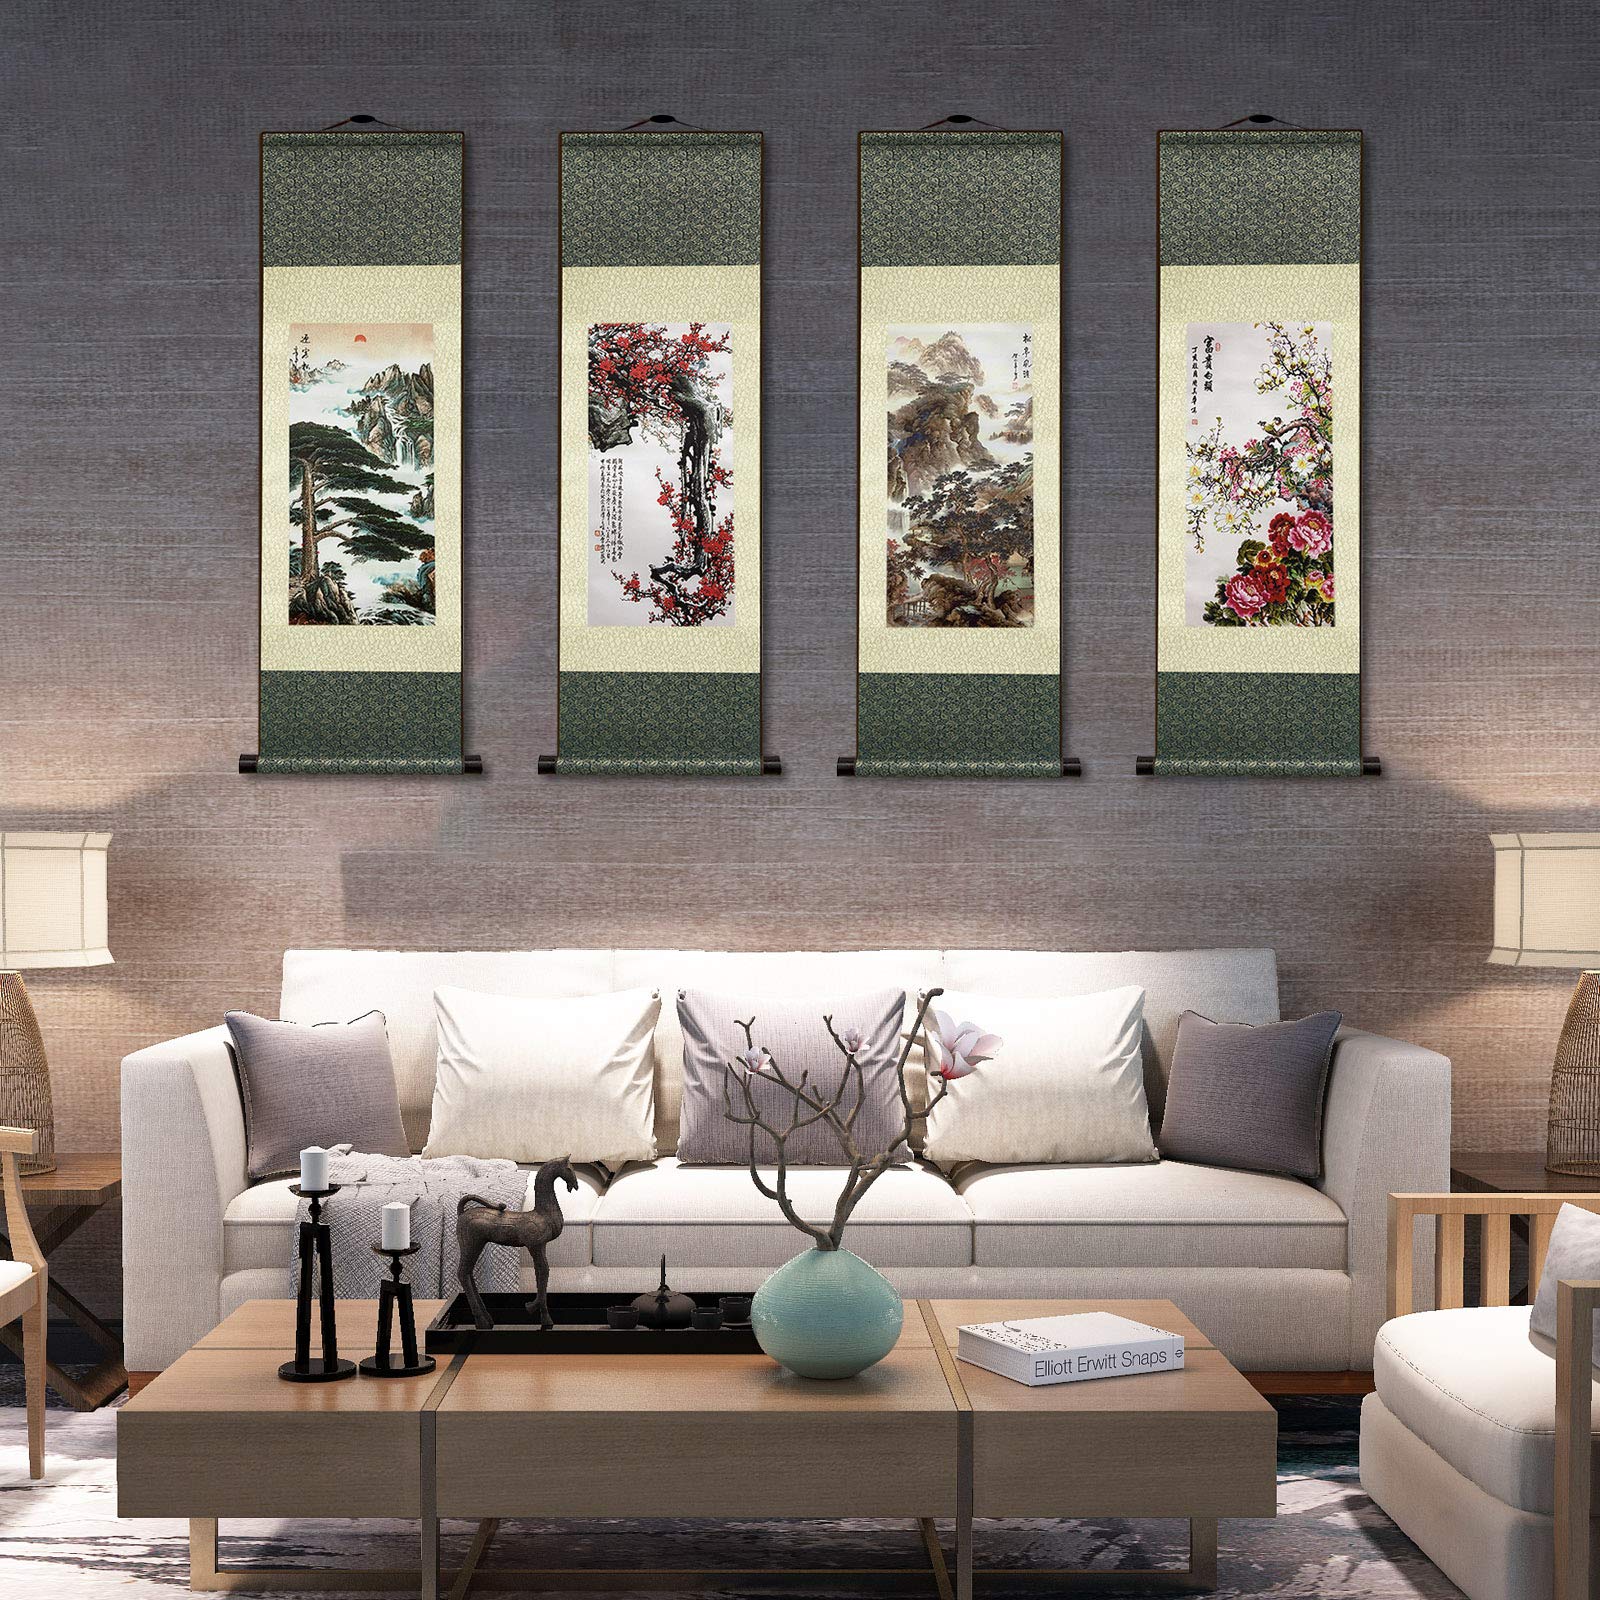 AtfArt Asian Wall Decor Beautiful Silk Scroll Painting Horse to Success - Win Instant Success Oriental Decor Chinese Art Wall Scroll Wall Hanging Painting Scroll (39 x 12 in)